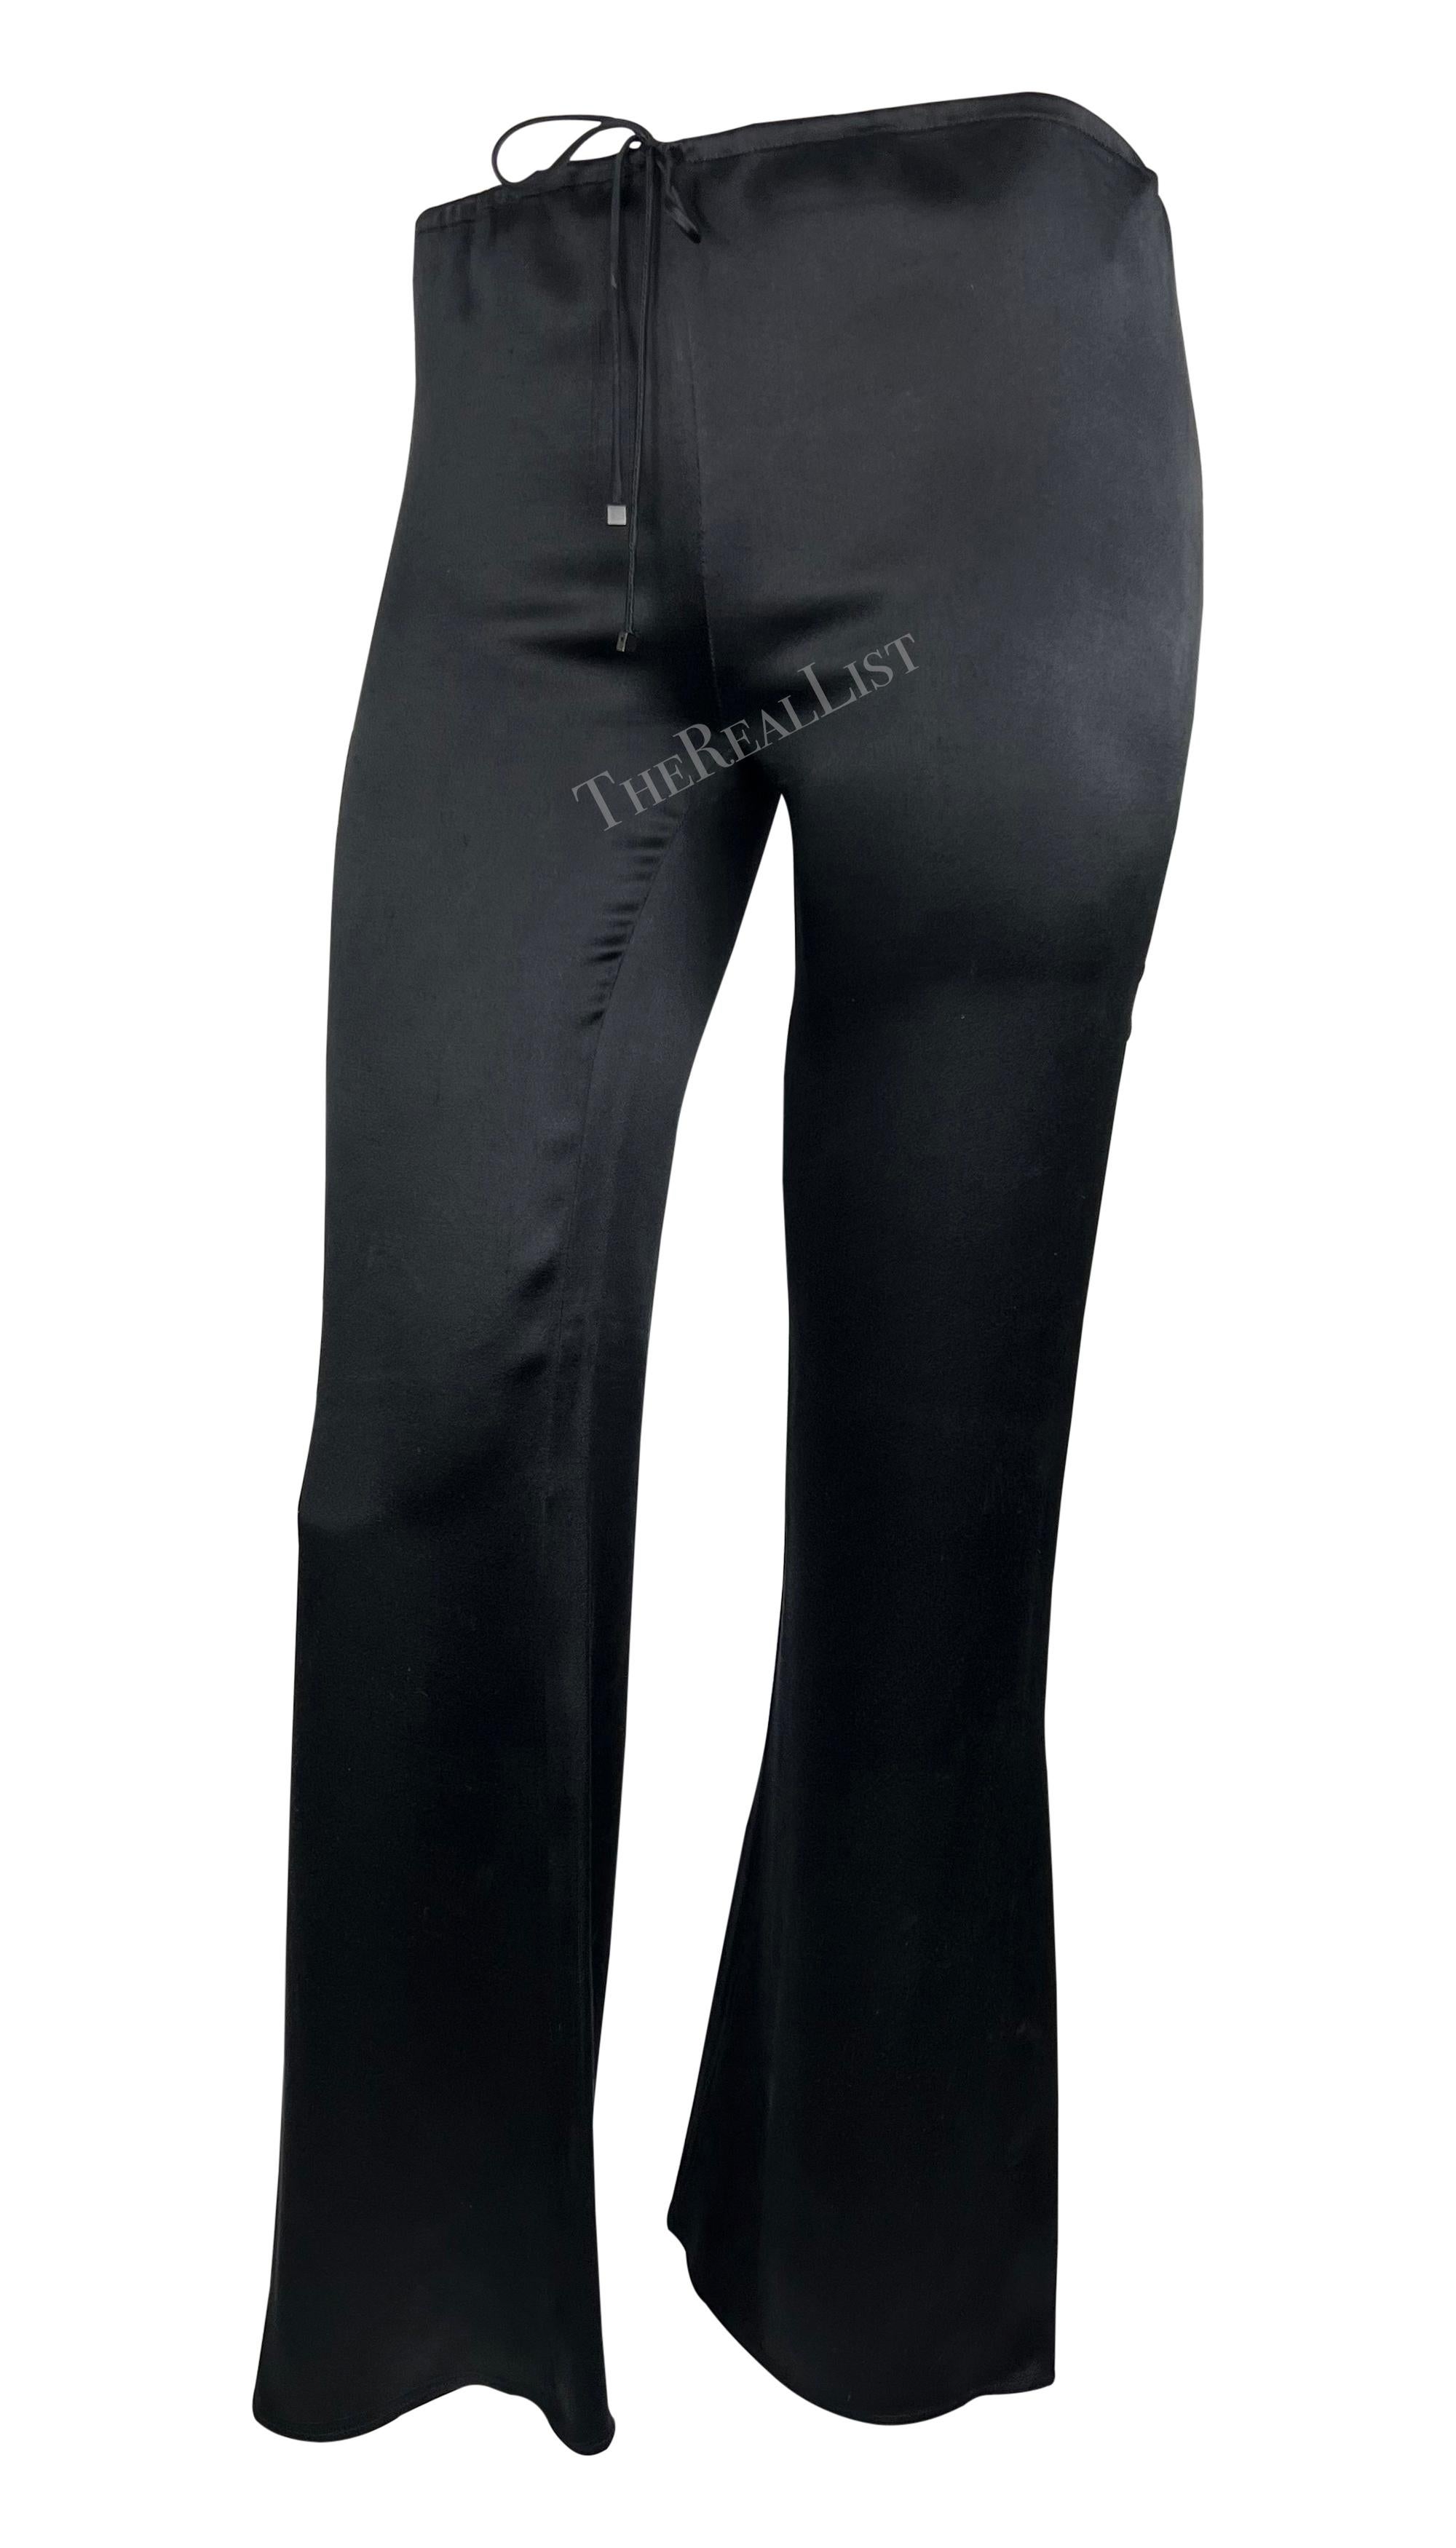 Crafted entirely from soft black silk, these drawstring pants by Gucci, designed by Tom Ford, are from the Cruise 2000 collection. Featuring a flattering flare-cut design, they are a must-have elevated essential. 

Approximate measurements:
Size -